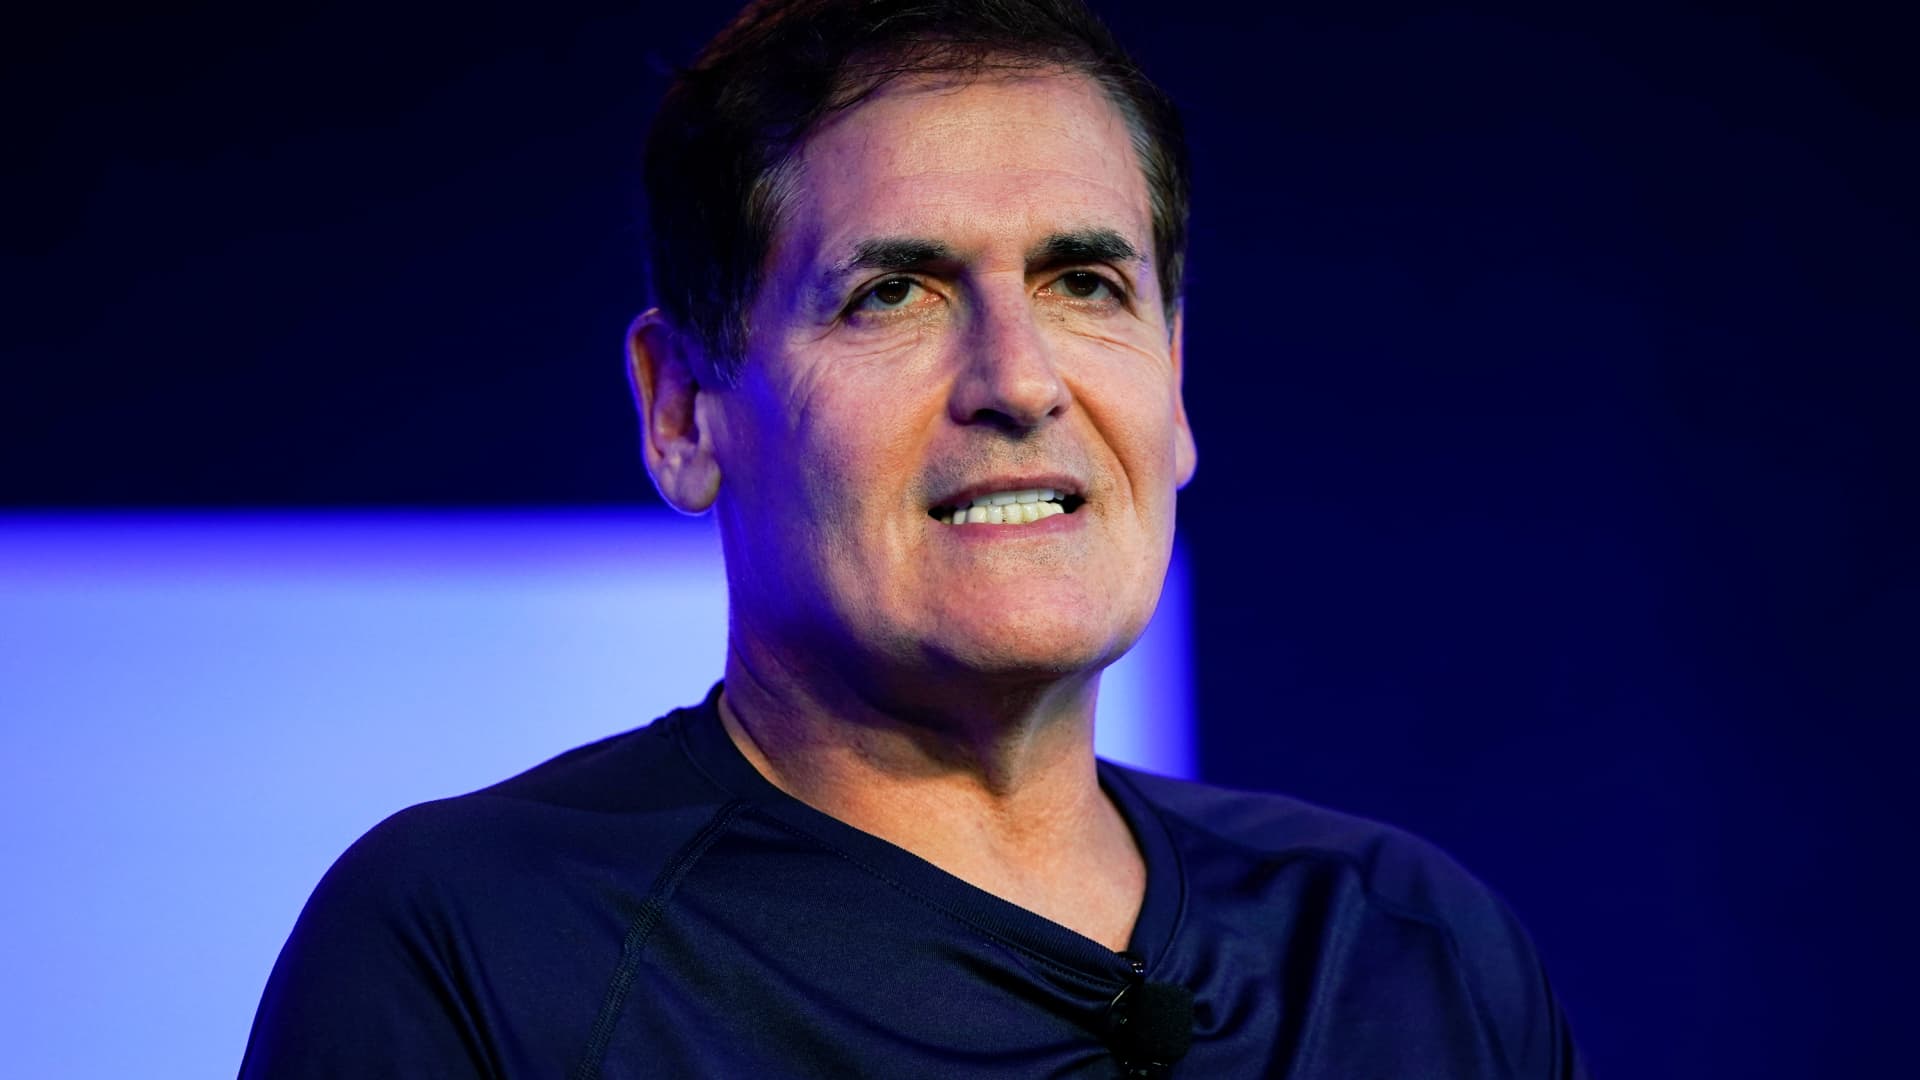 Mark Cuban says this was his worst 'Shark Tank' investment ever: 'Next thing you know, all of the money’s gone'